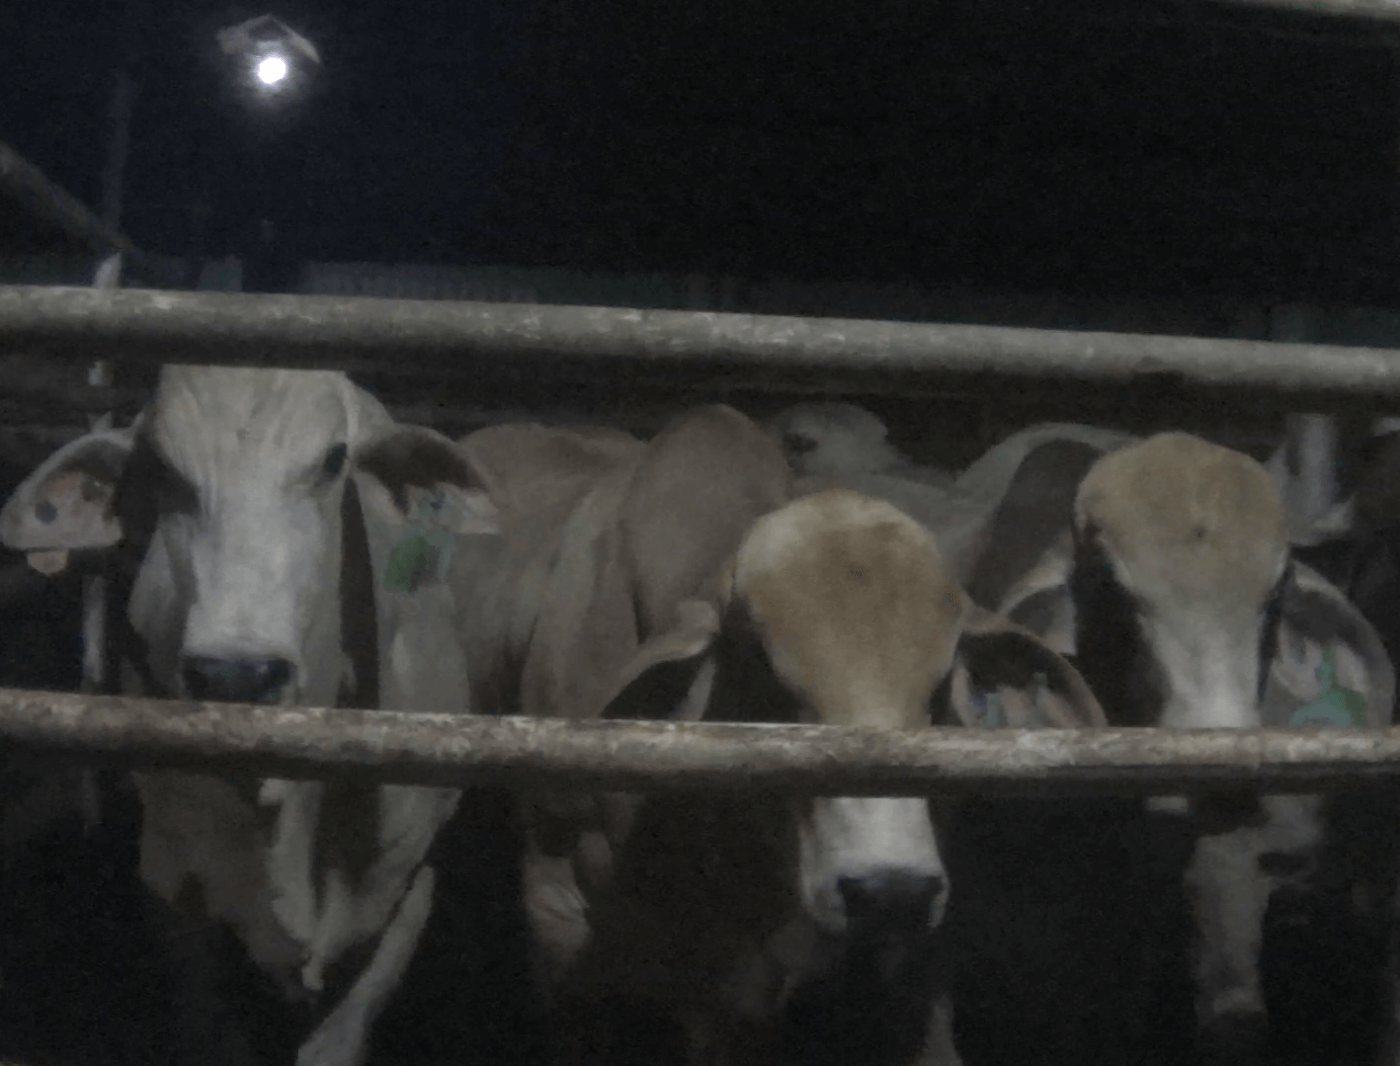 australian cattle at indonesia slaughterhouse as seen in peta asia investigation